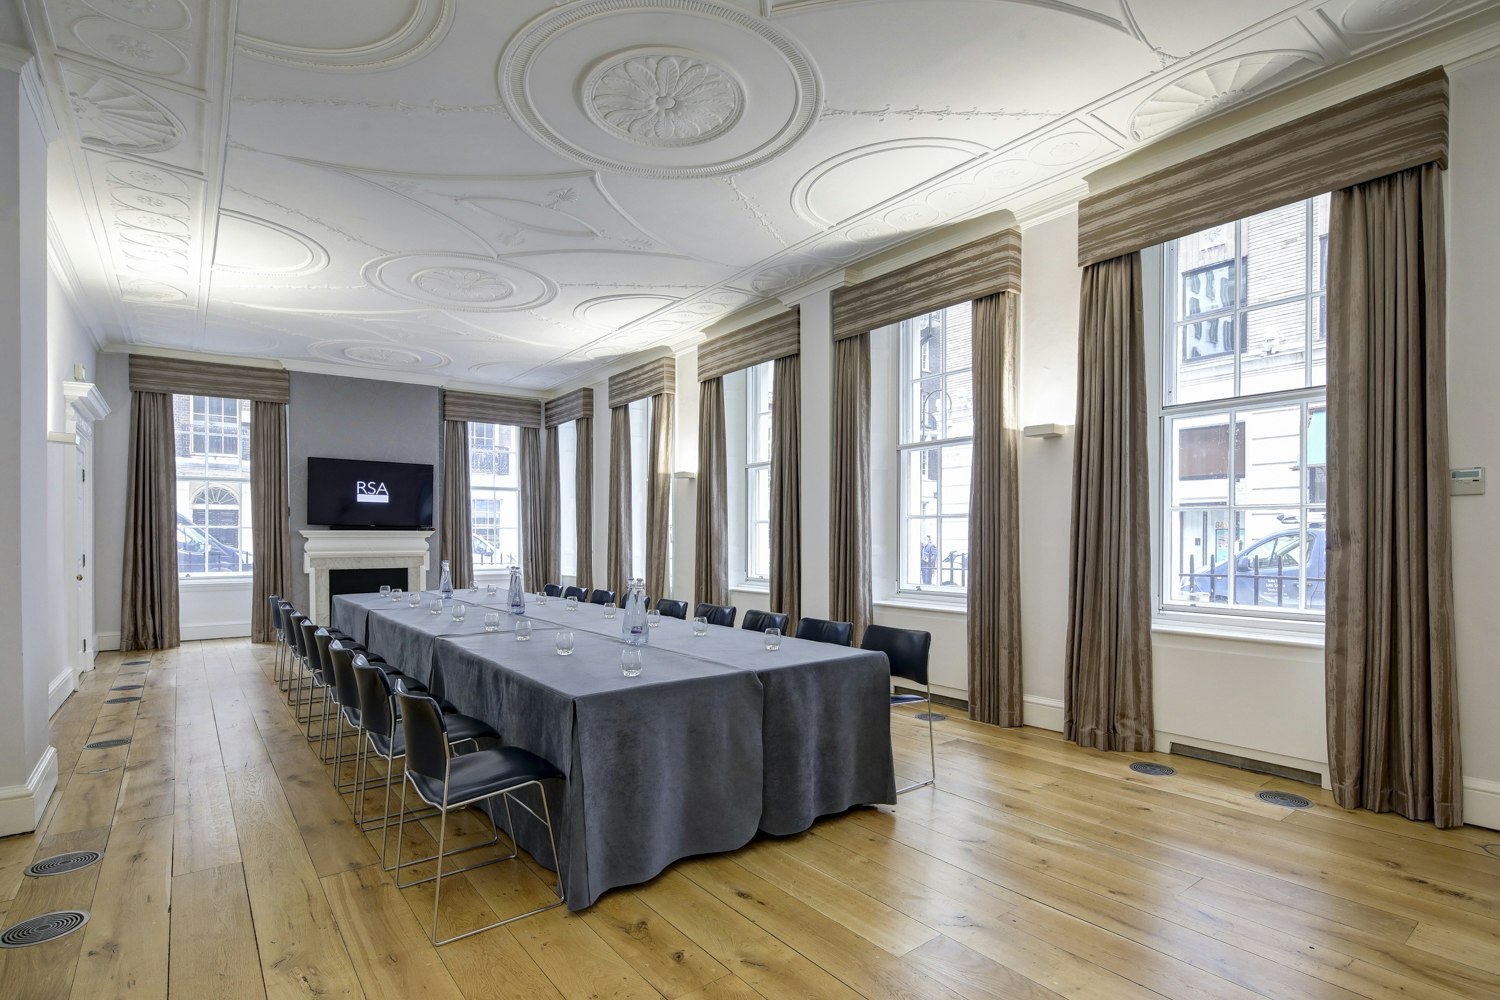 Reception Venues in West London - RSA House